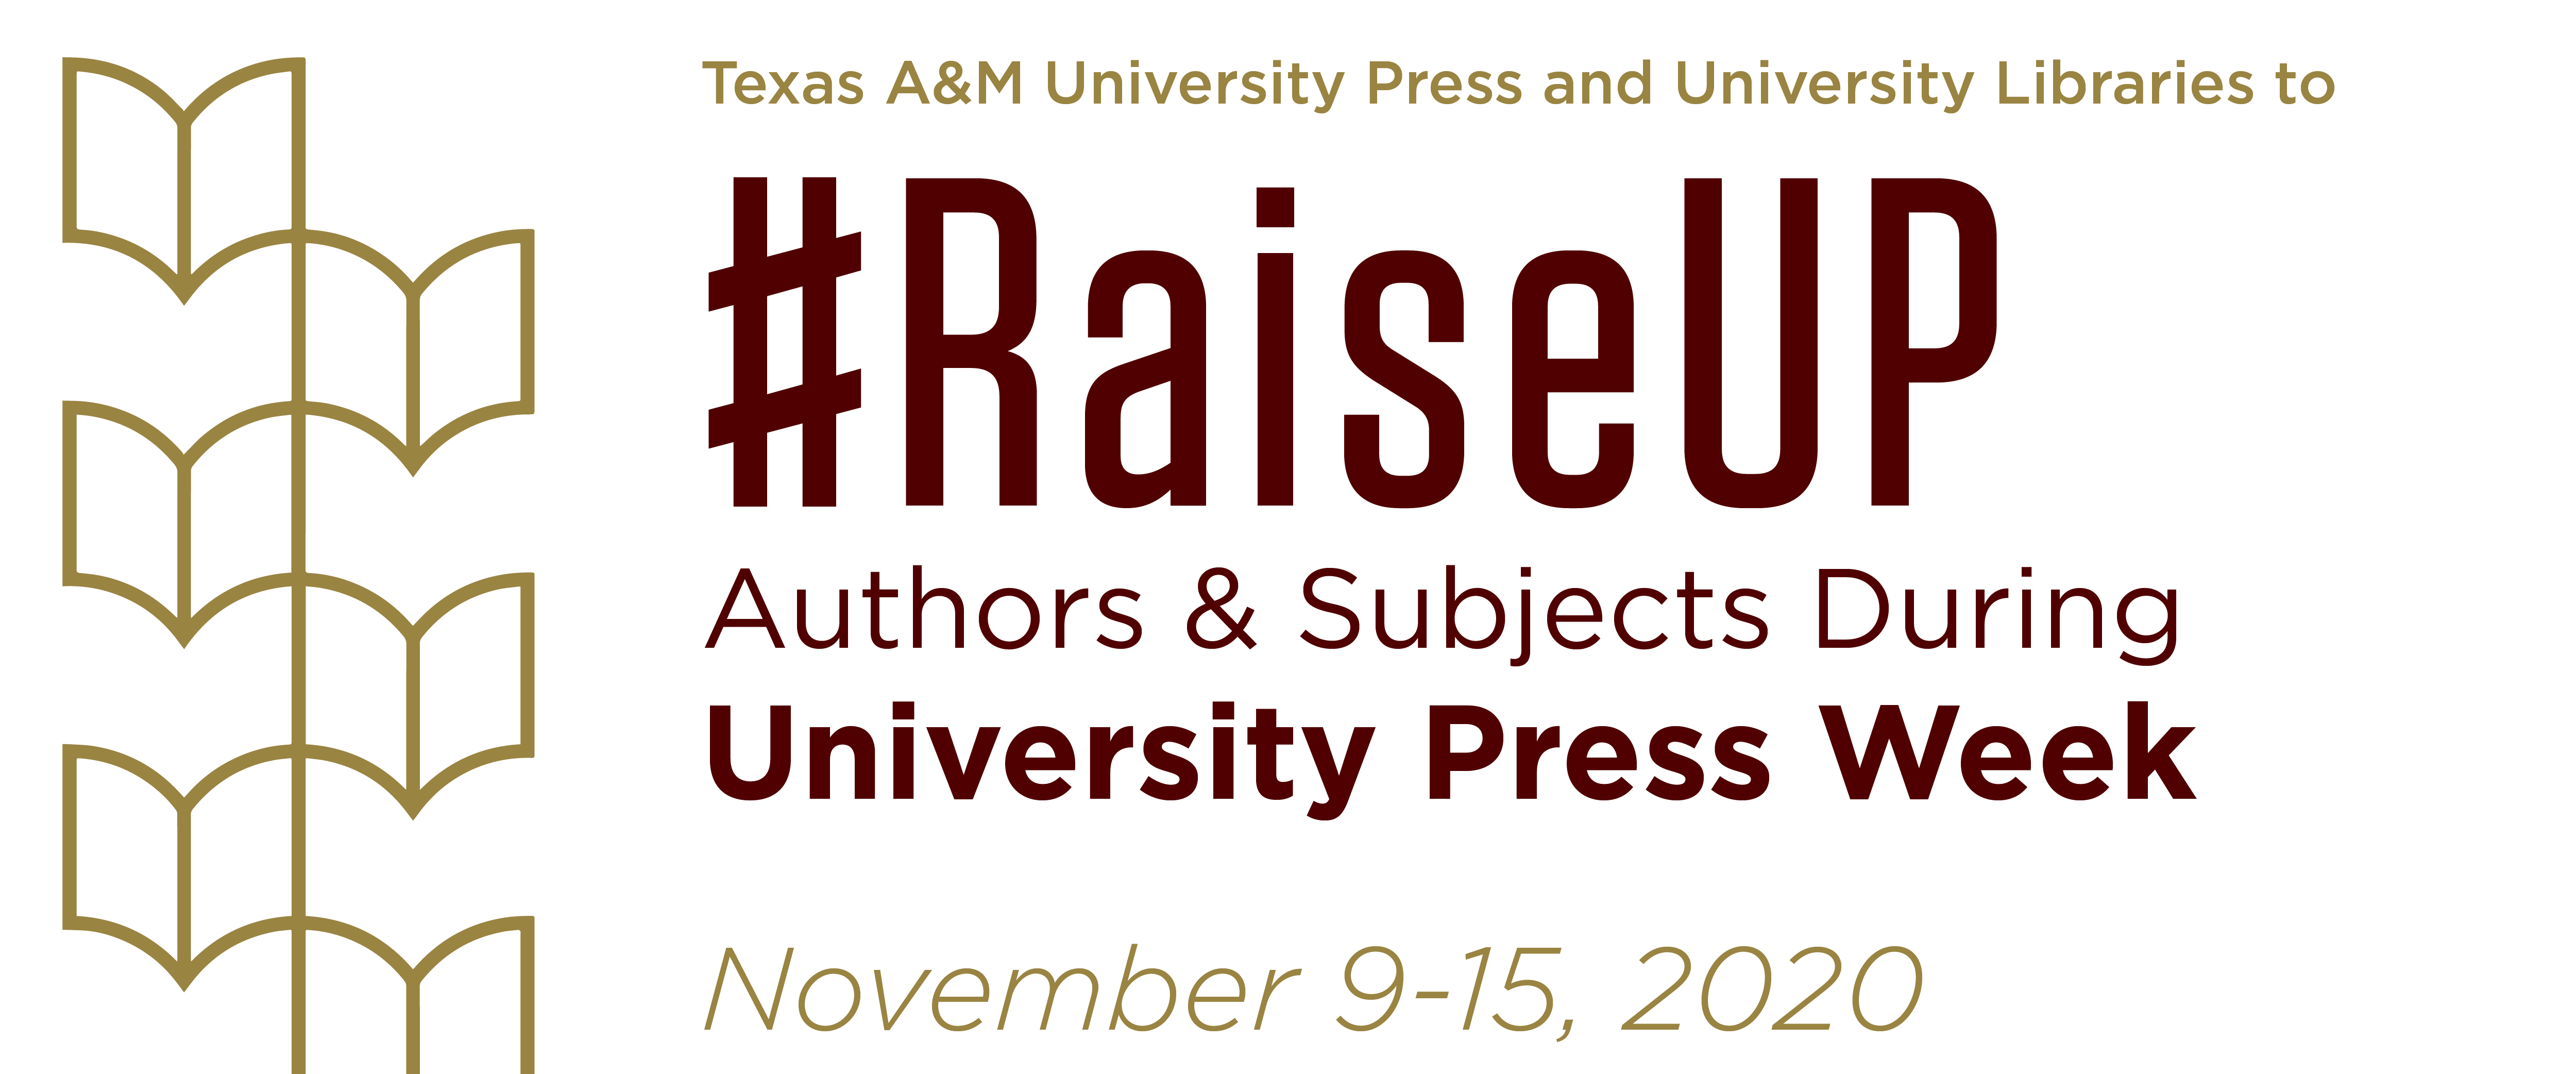 Texas A&M University Press and University Libraries to #RaiseUP Authors & Subjects during University Press Week, November 9 through 15, 2020.